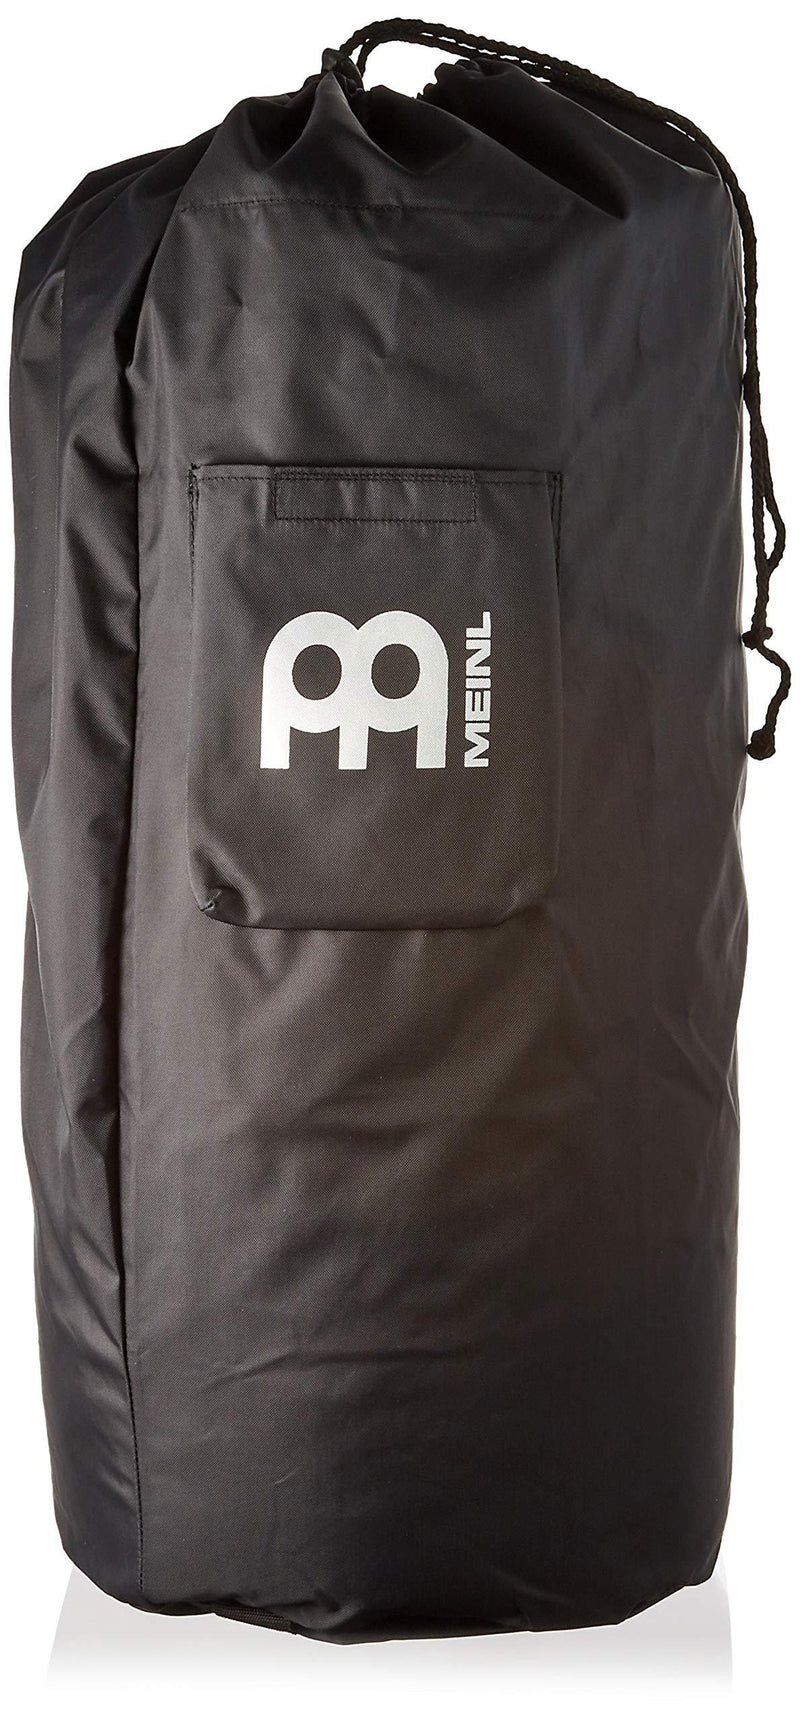 Meinl Percussion Bag-Standard Size for Most Djembes-Heavy Duty Nylon with Shoulder Strap and Outer Pocket, Black (MSTDJB)